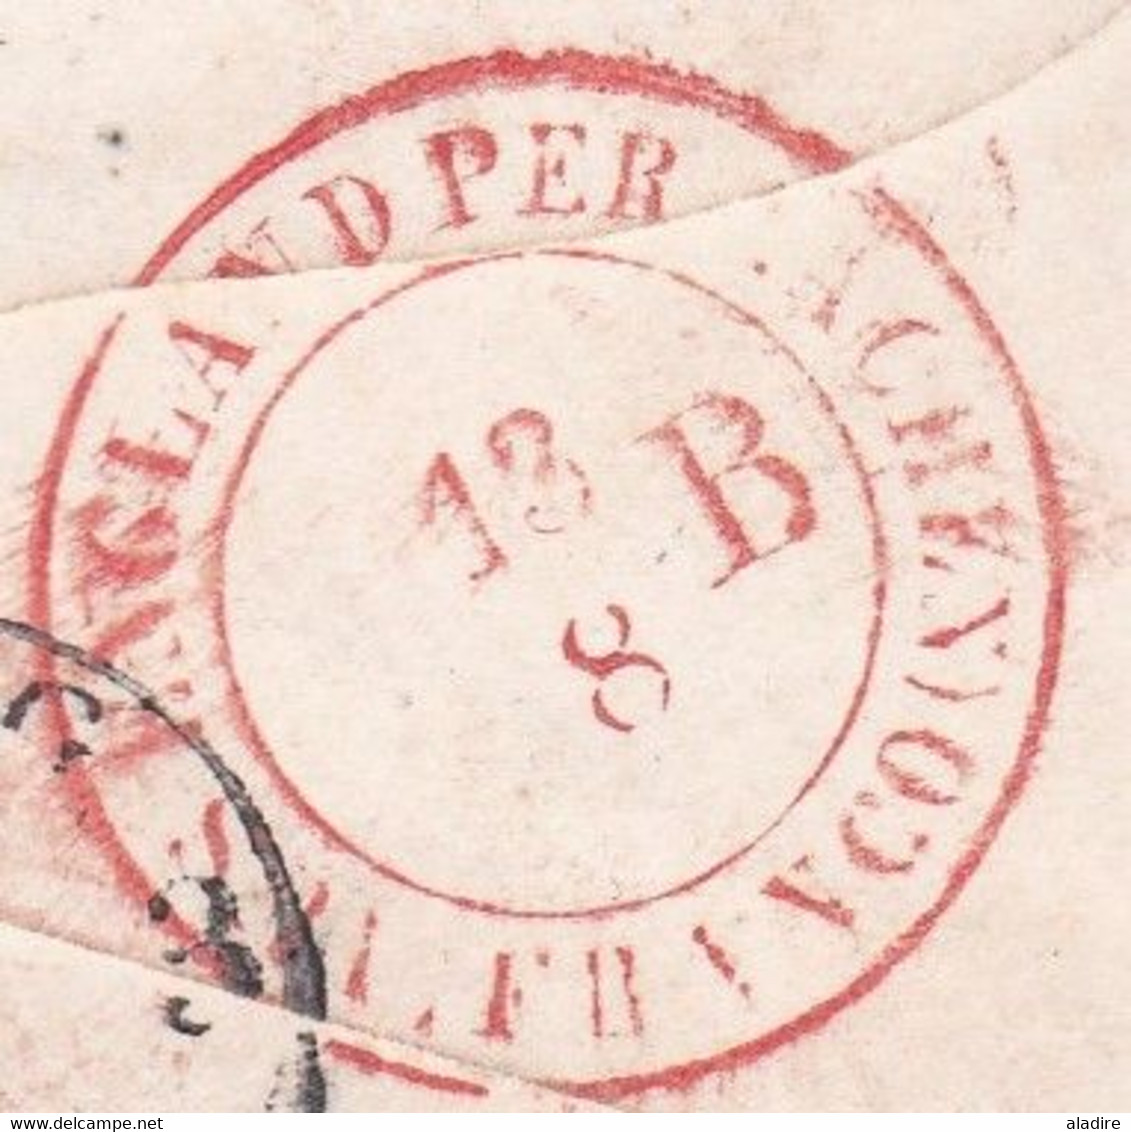 1852 - Prepaid Cover from Winchester, England to Aix la Chapelle Aachen, Germany and not France - transit cancel